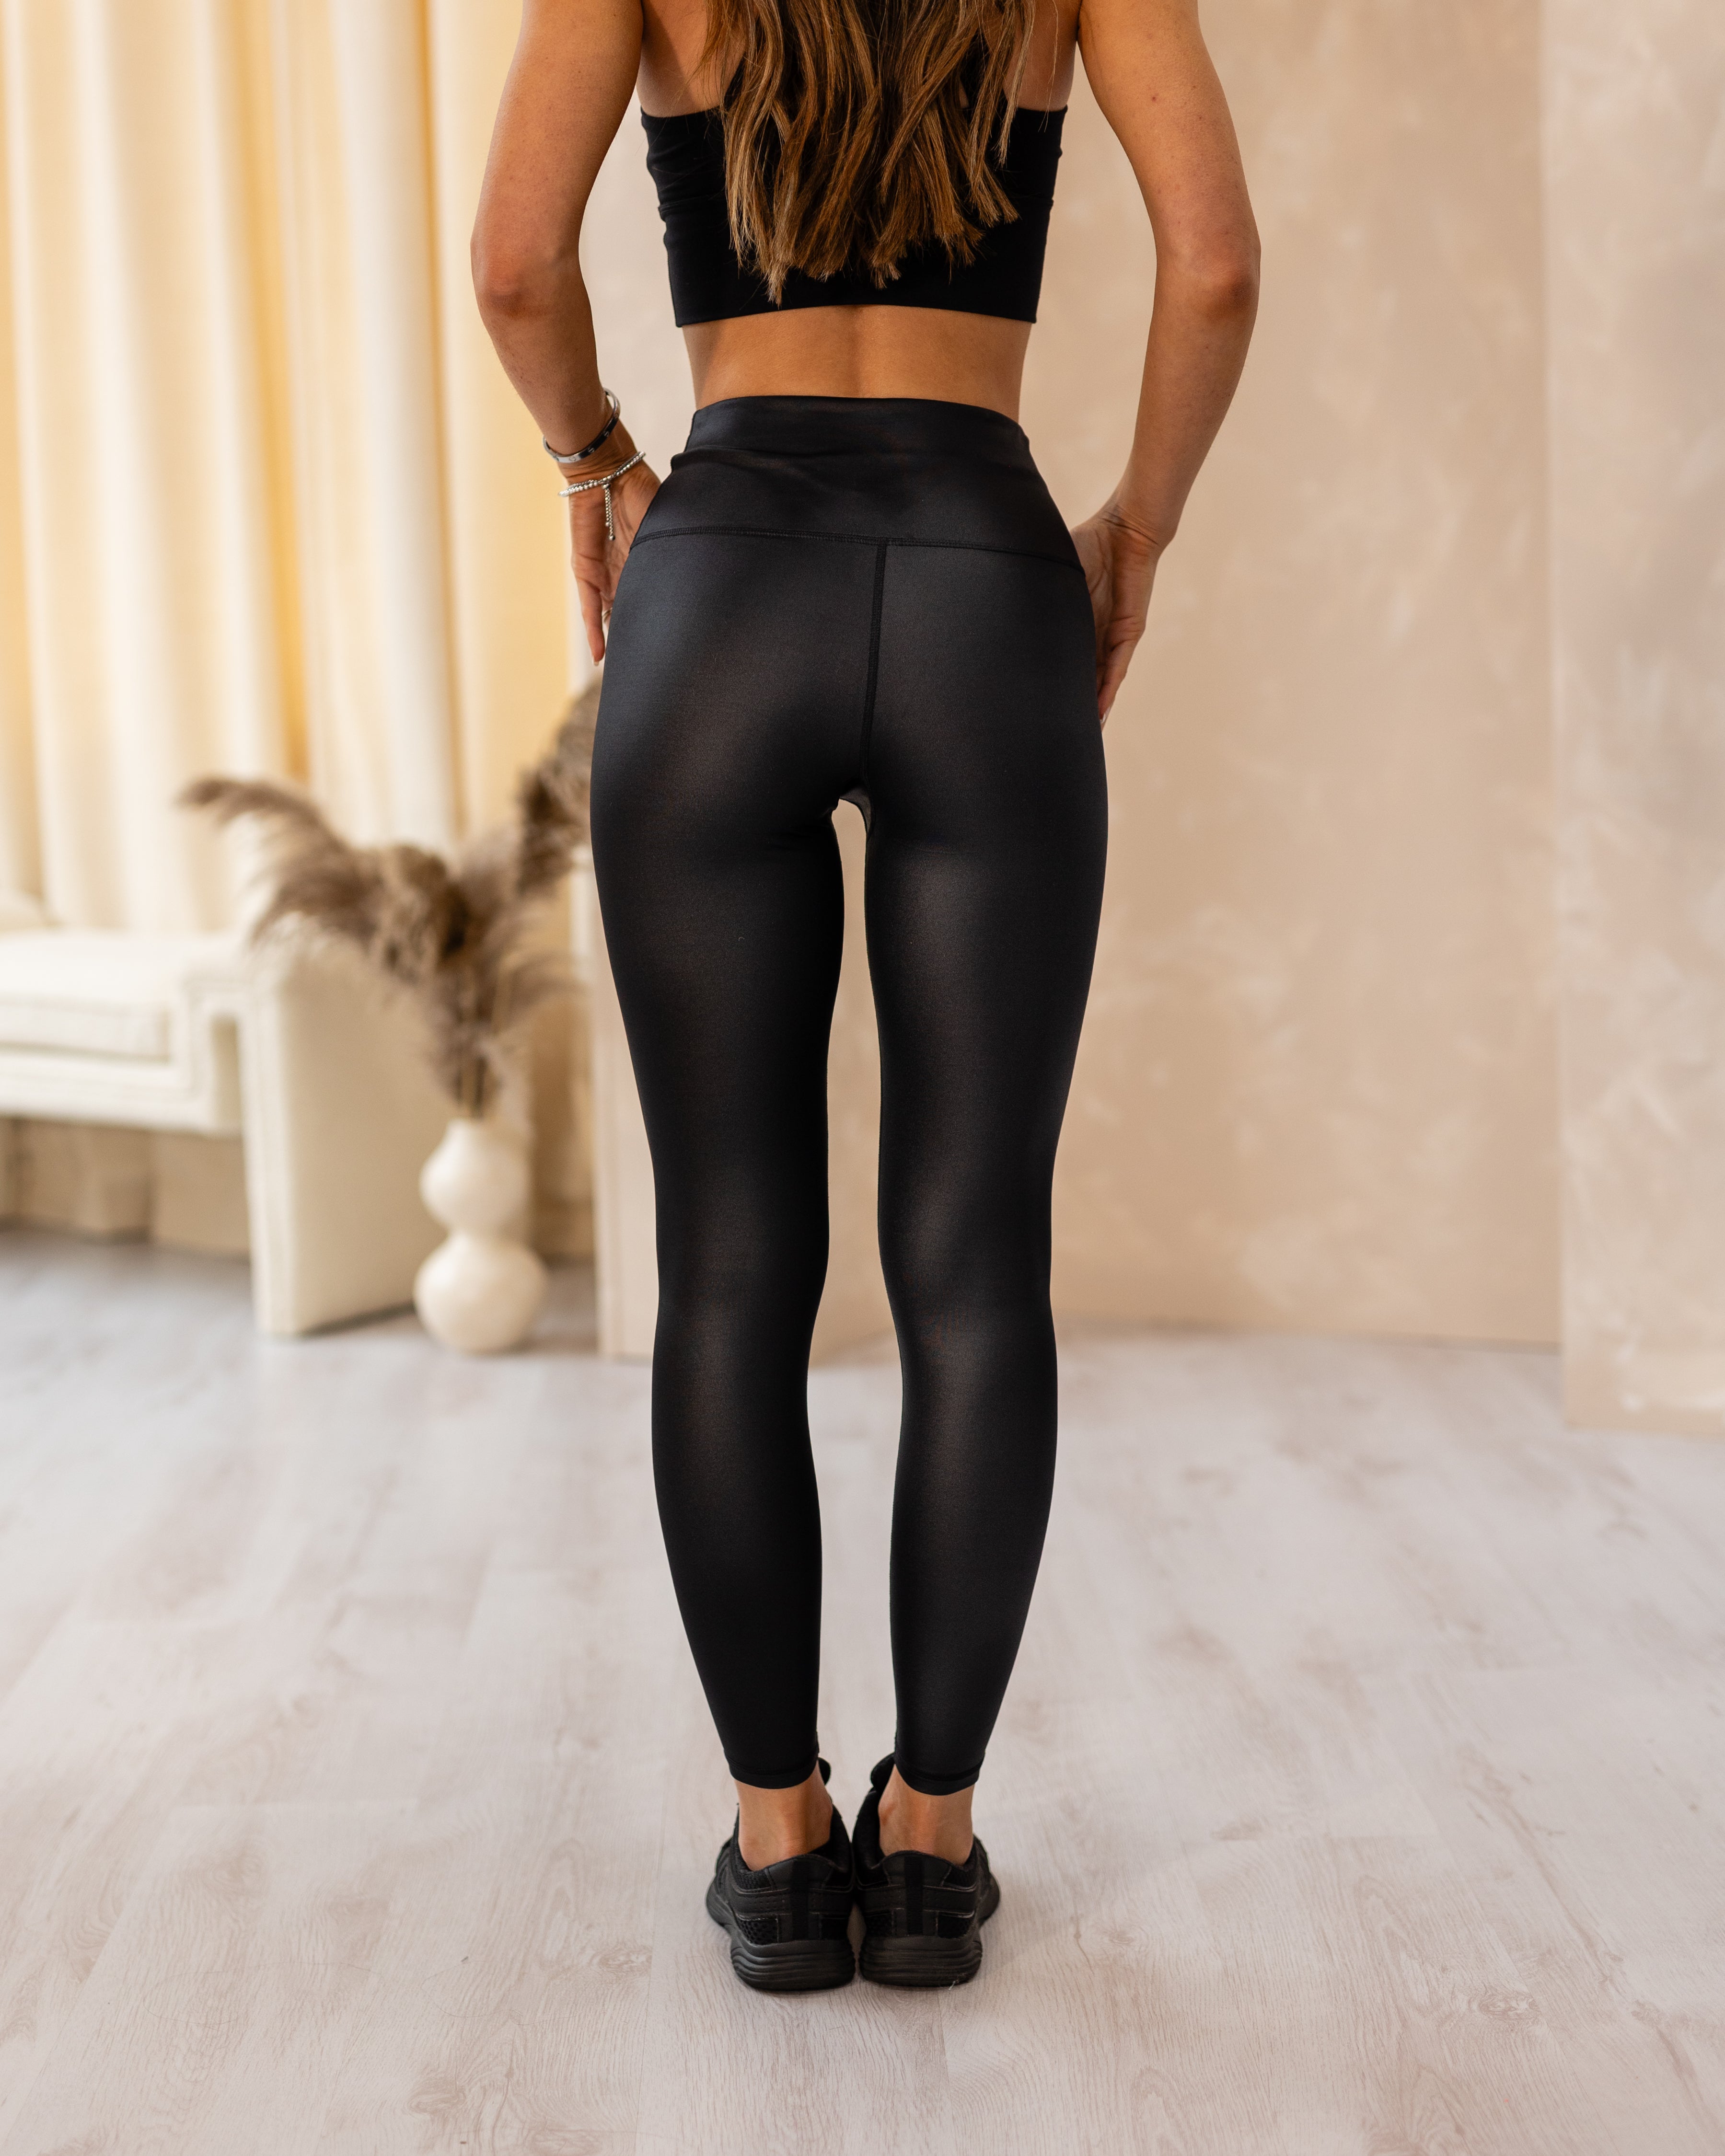 You ABSOLUTELY need these Second SKN Leggings! Wear it at home, to